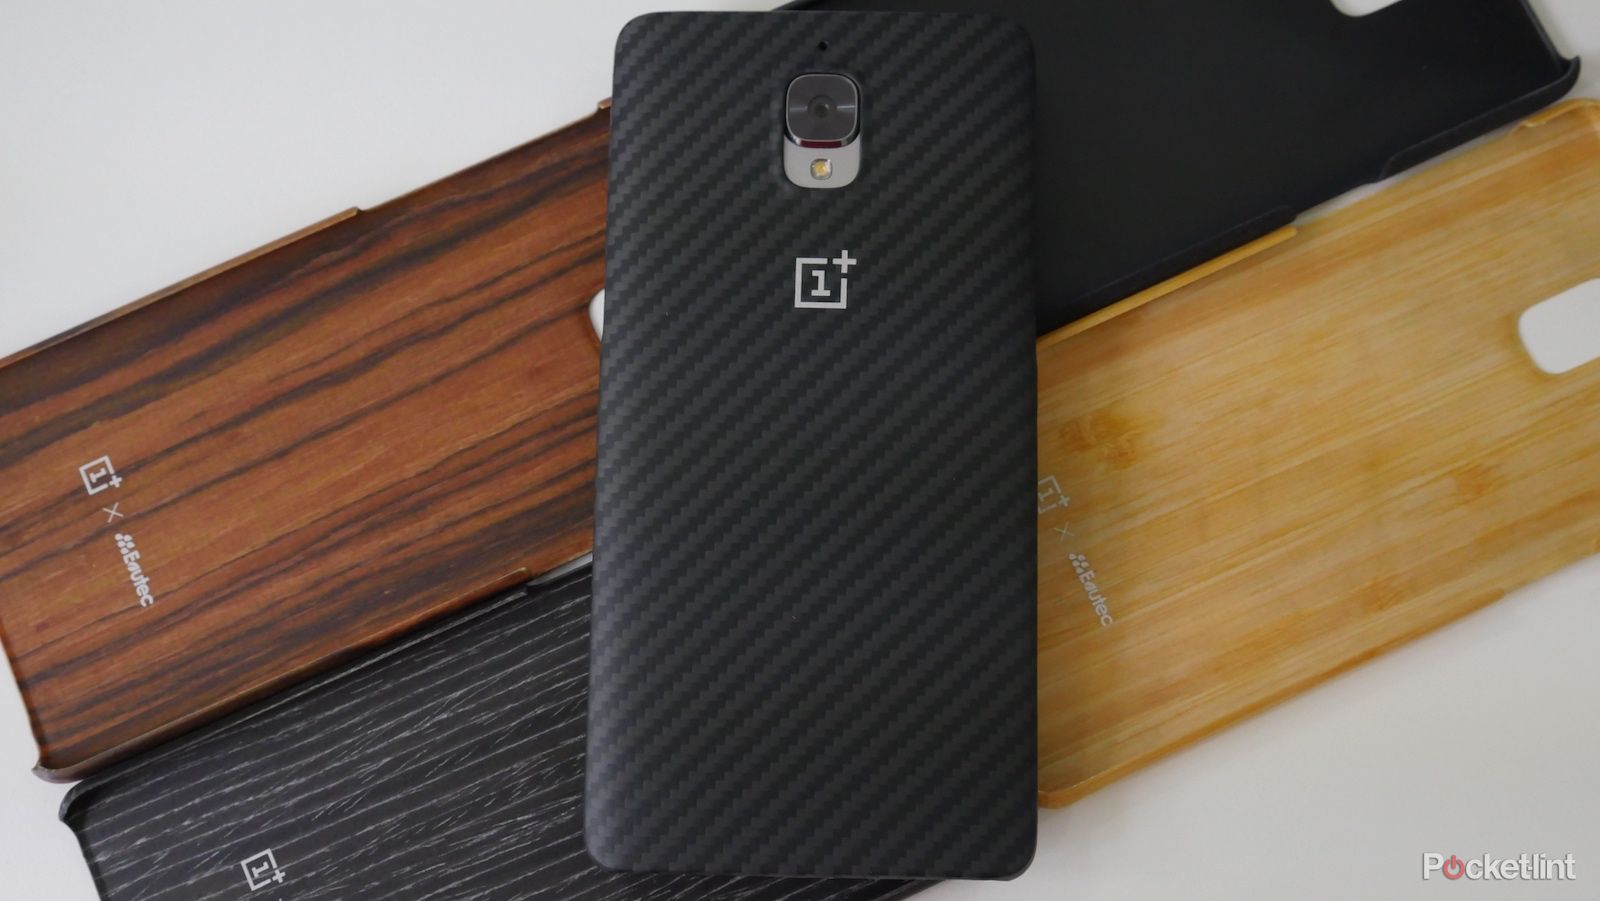 oneplus 3 official cases in pictures bamboo karbon sandstone and more image 1